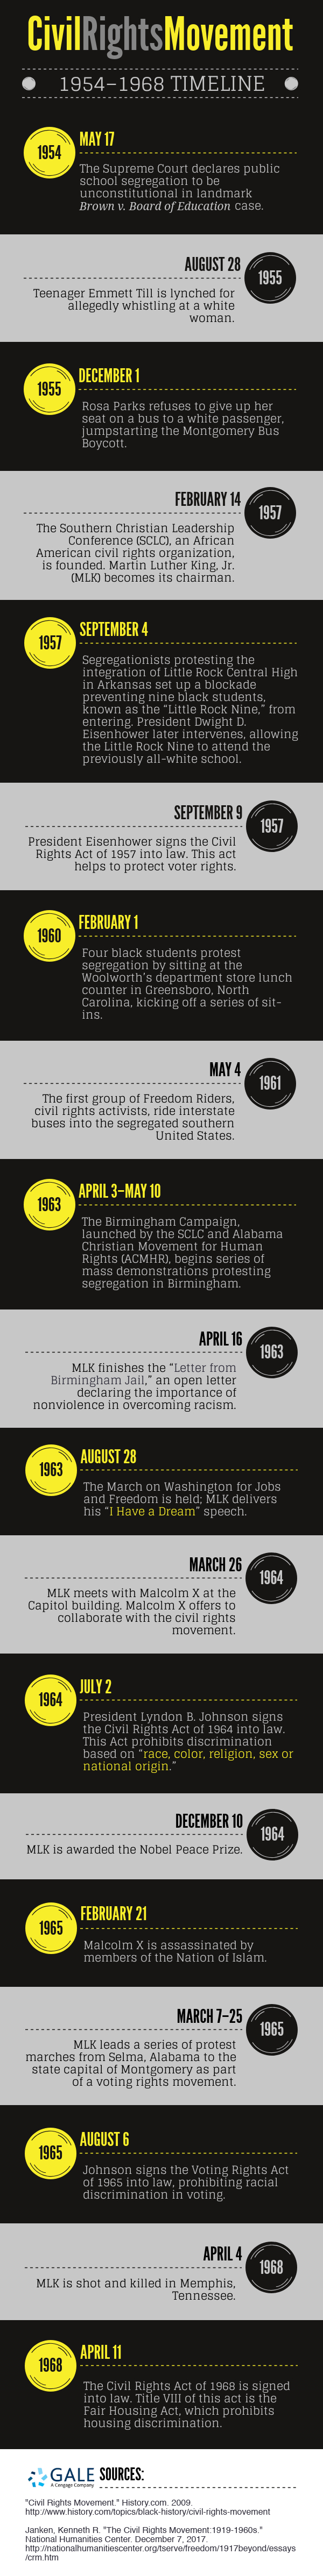 A selective chronology of events that occurred between 1954 and 1968 as part of the U.S. civil rights movement